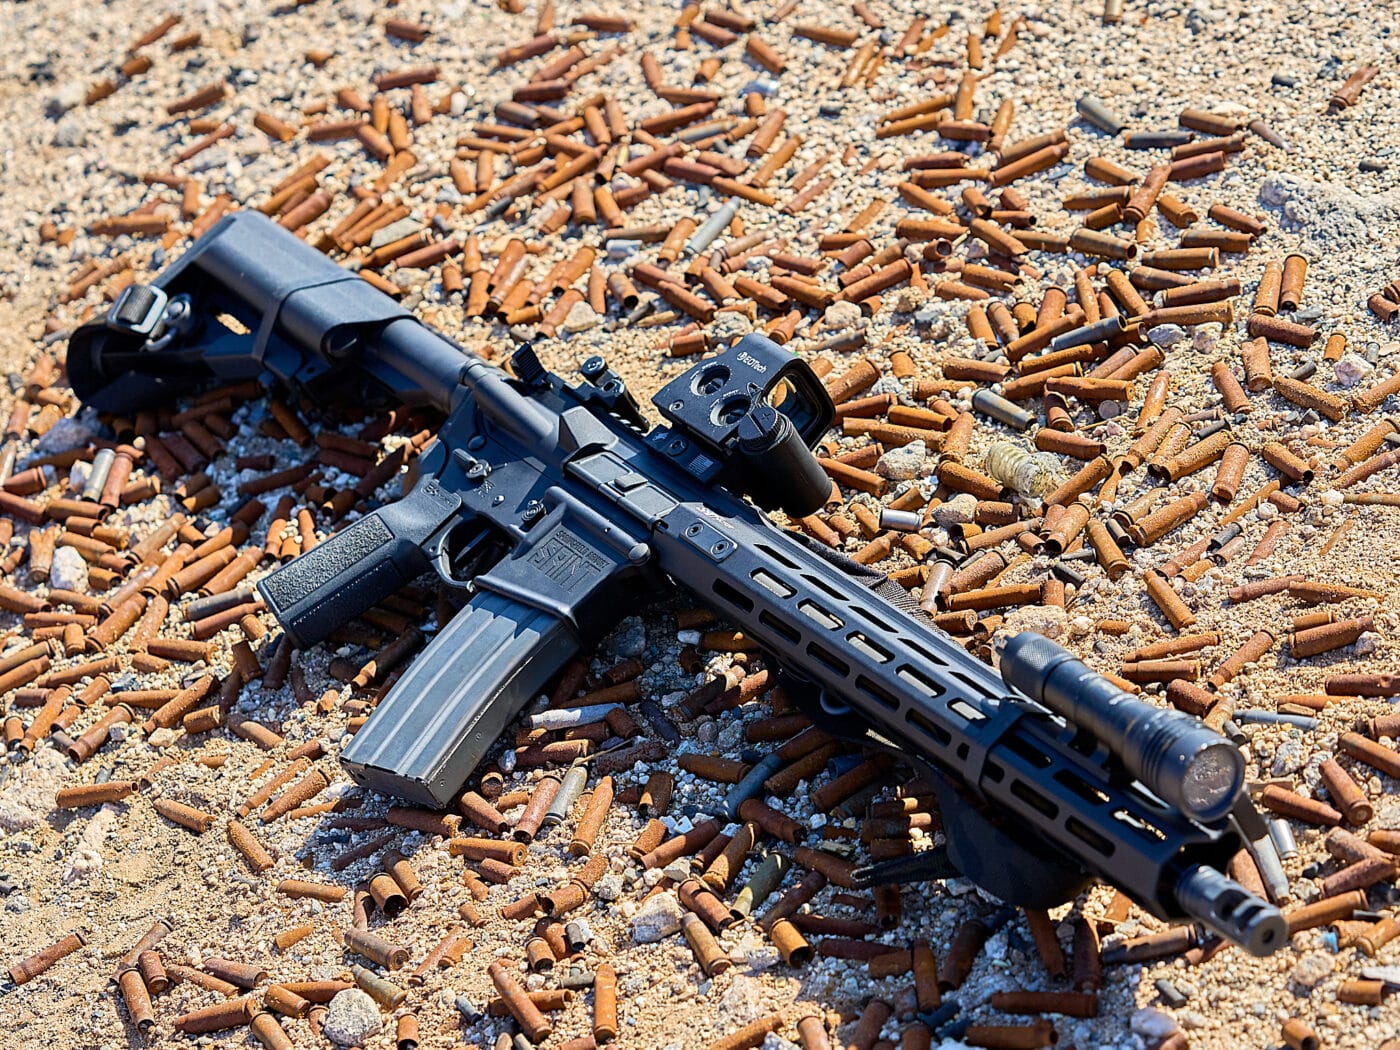 Modified AR-15 for self defense and tactical use